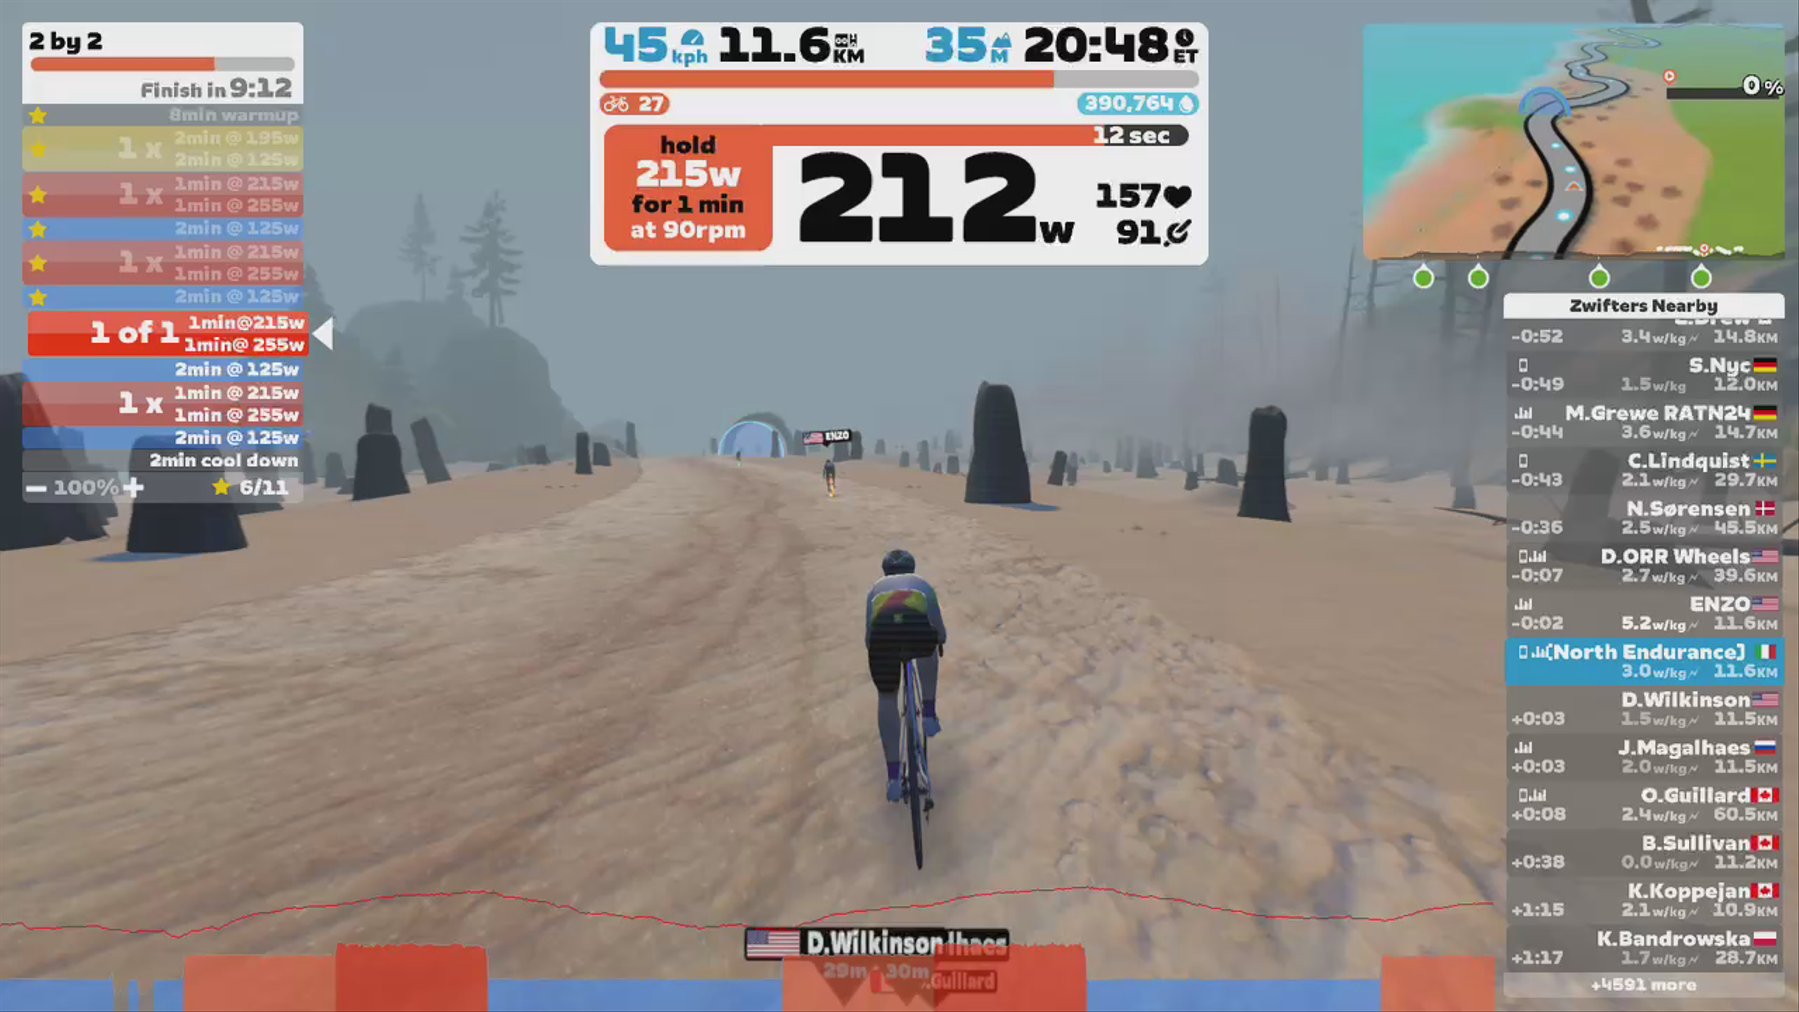 Zwift - 2 by 2 on Going Coastal in Watopia